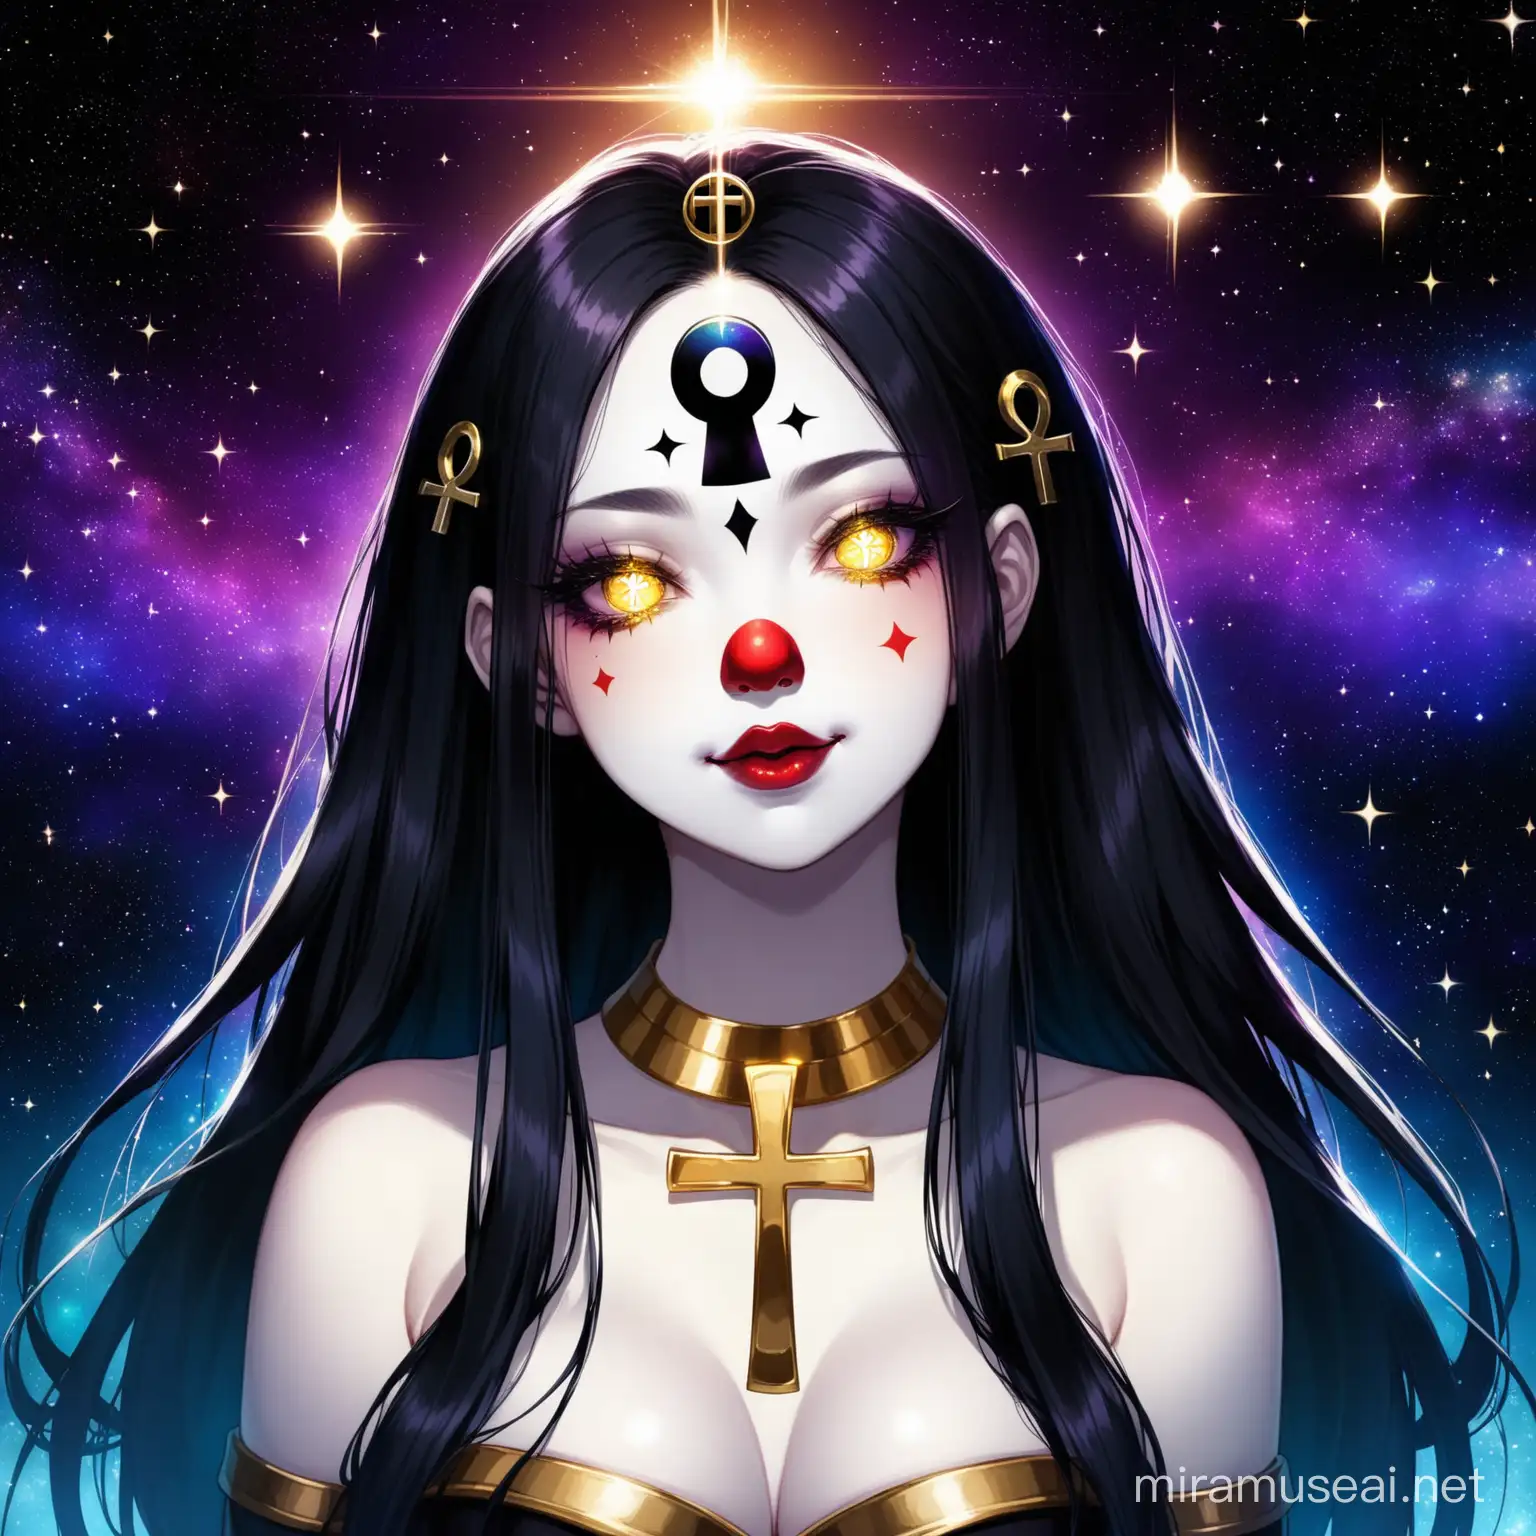 Albino Female Clown with Ankh Symbol on Forehead in Cosmic Twilight